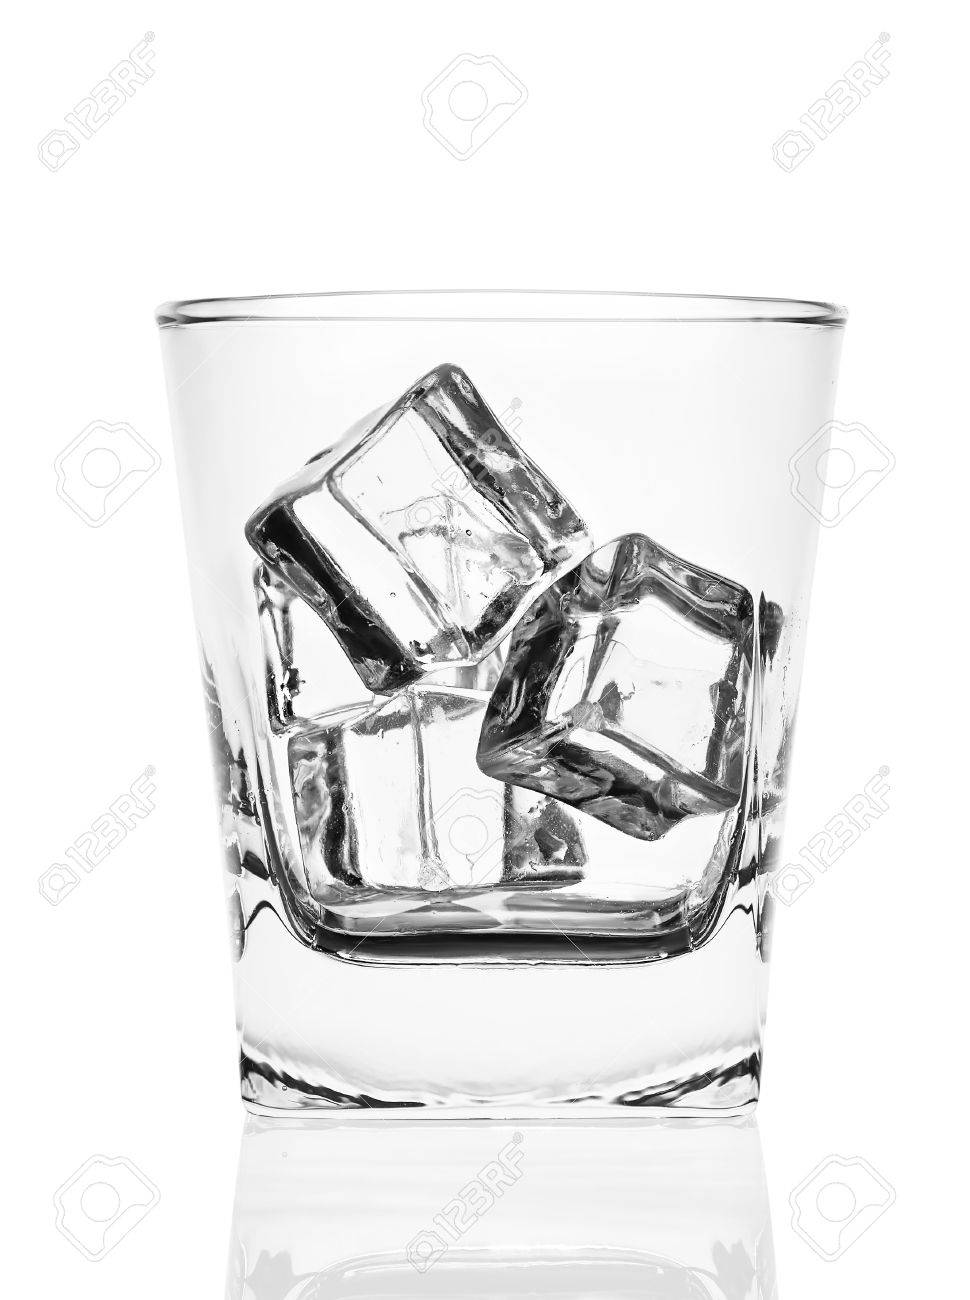 Ice Cubes Drawing at GetDrawings.com | Free for personal use Ice Cubes